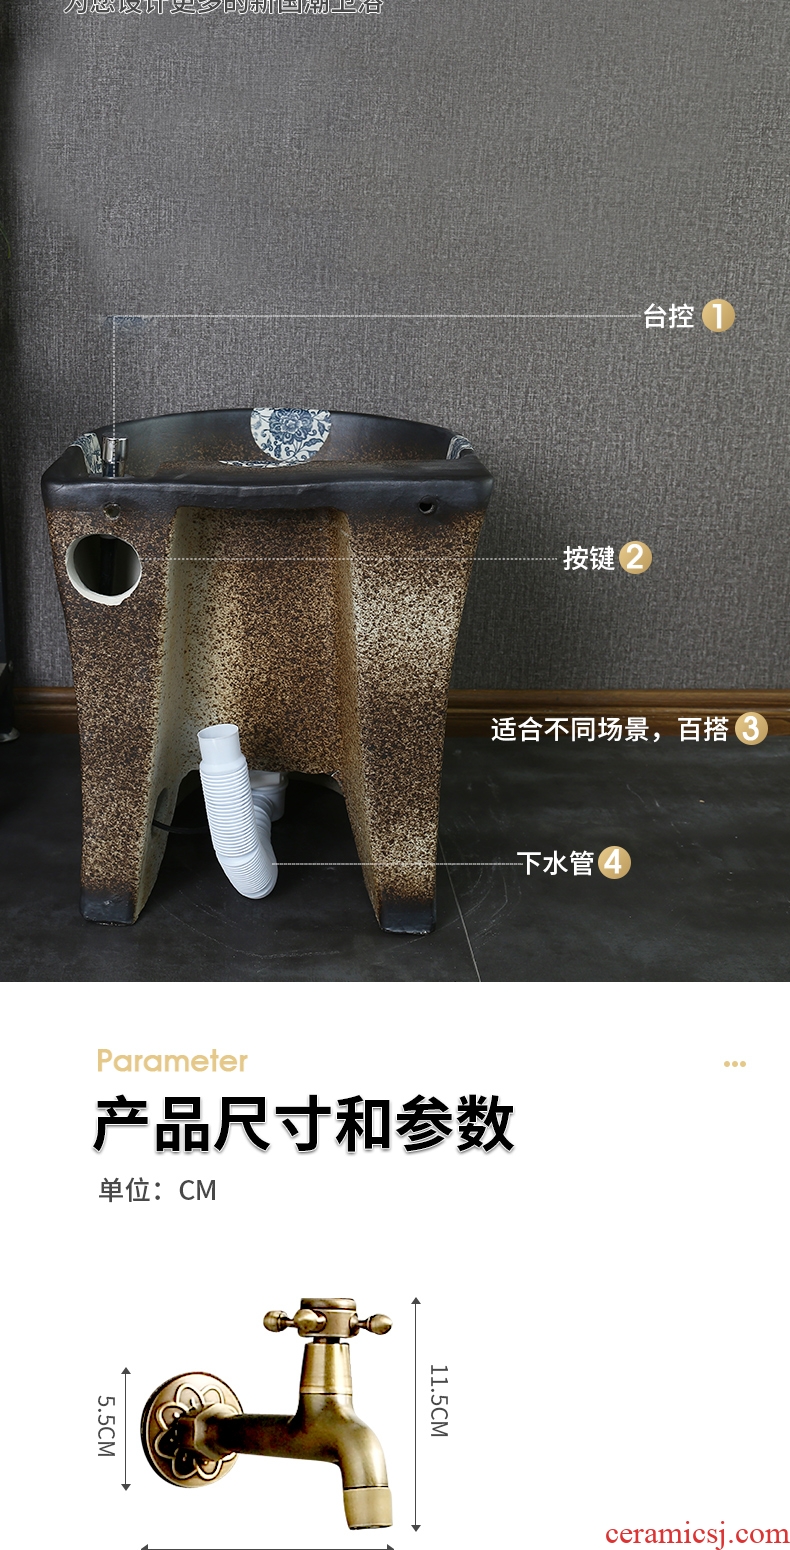 Ceramic toilet household balcony retro mop pool floor mop pool small frosted mop basin to wash the mop pool